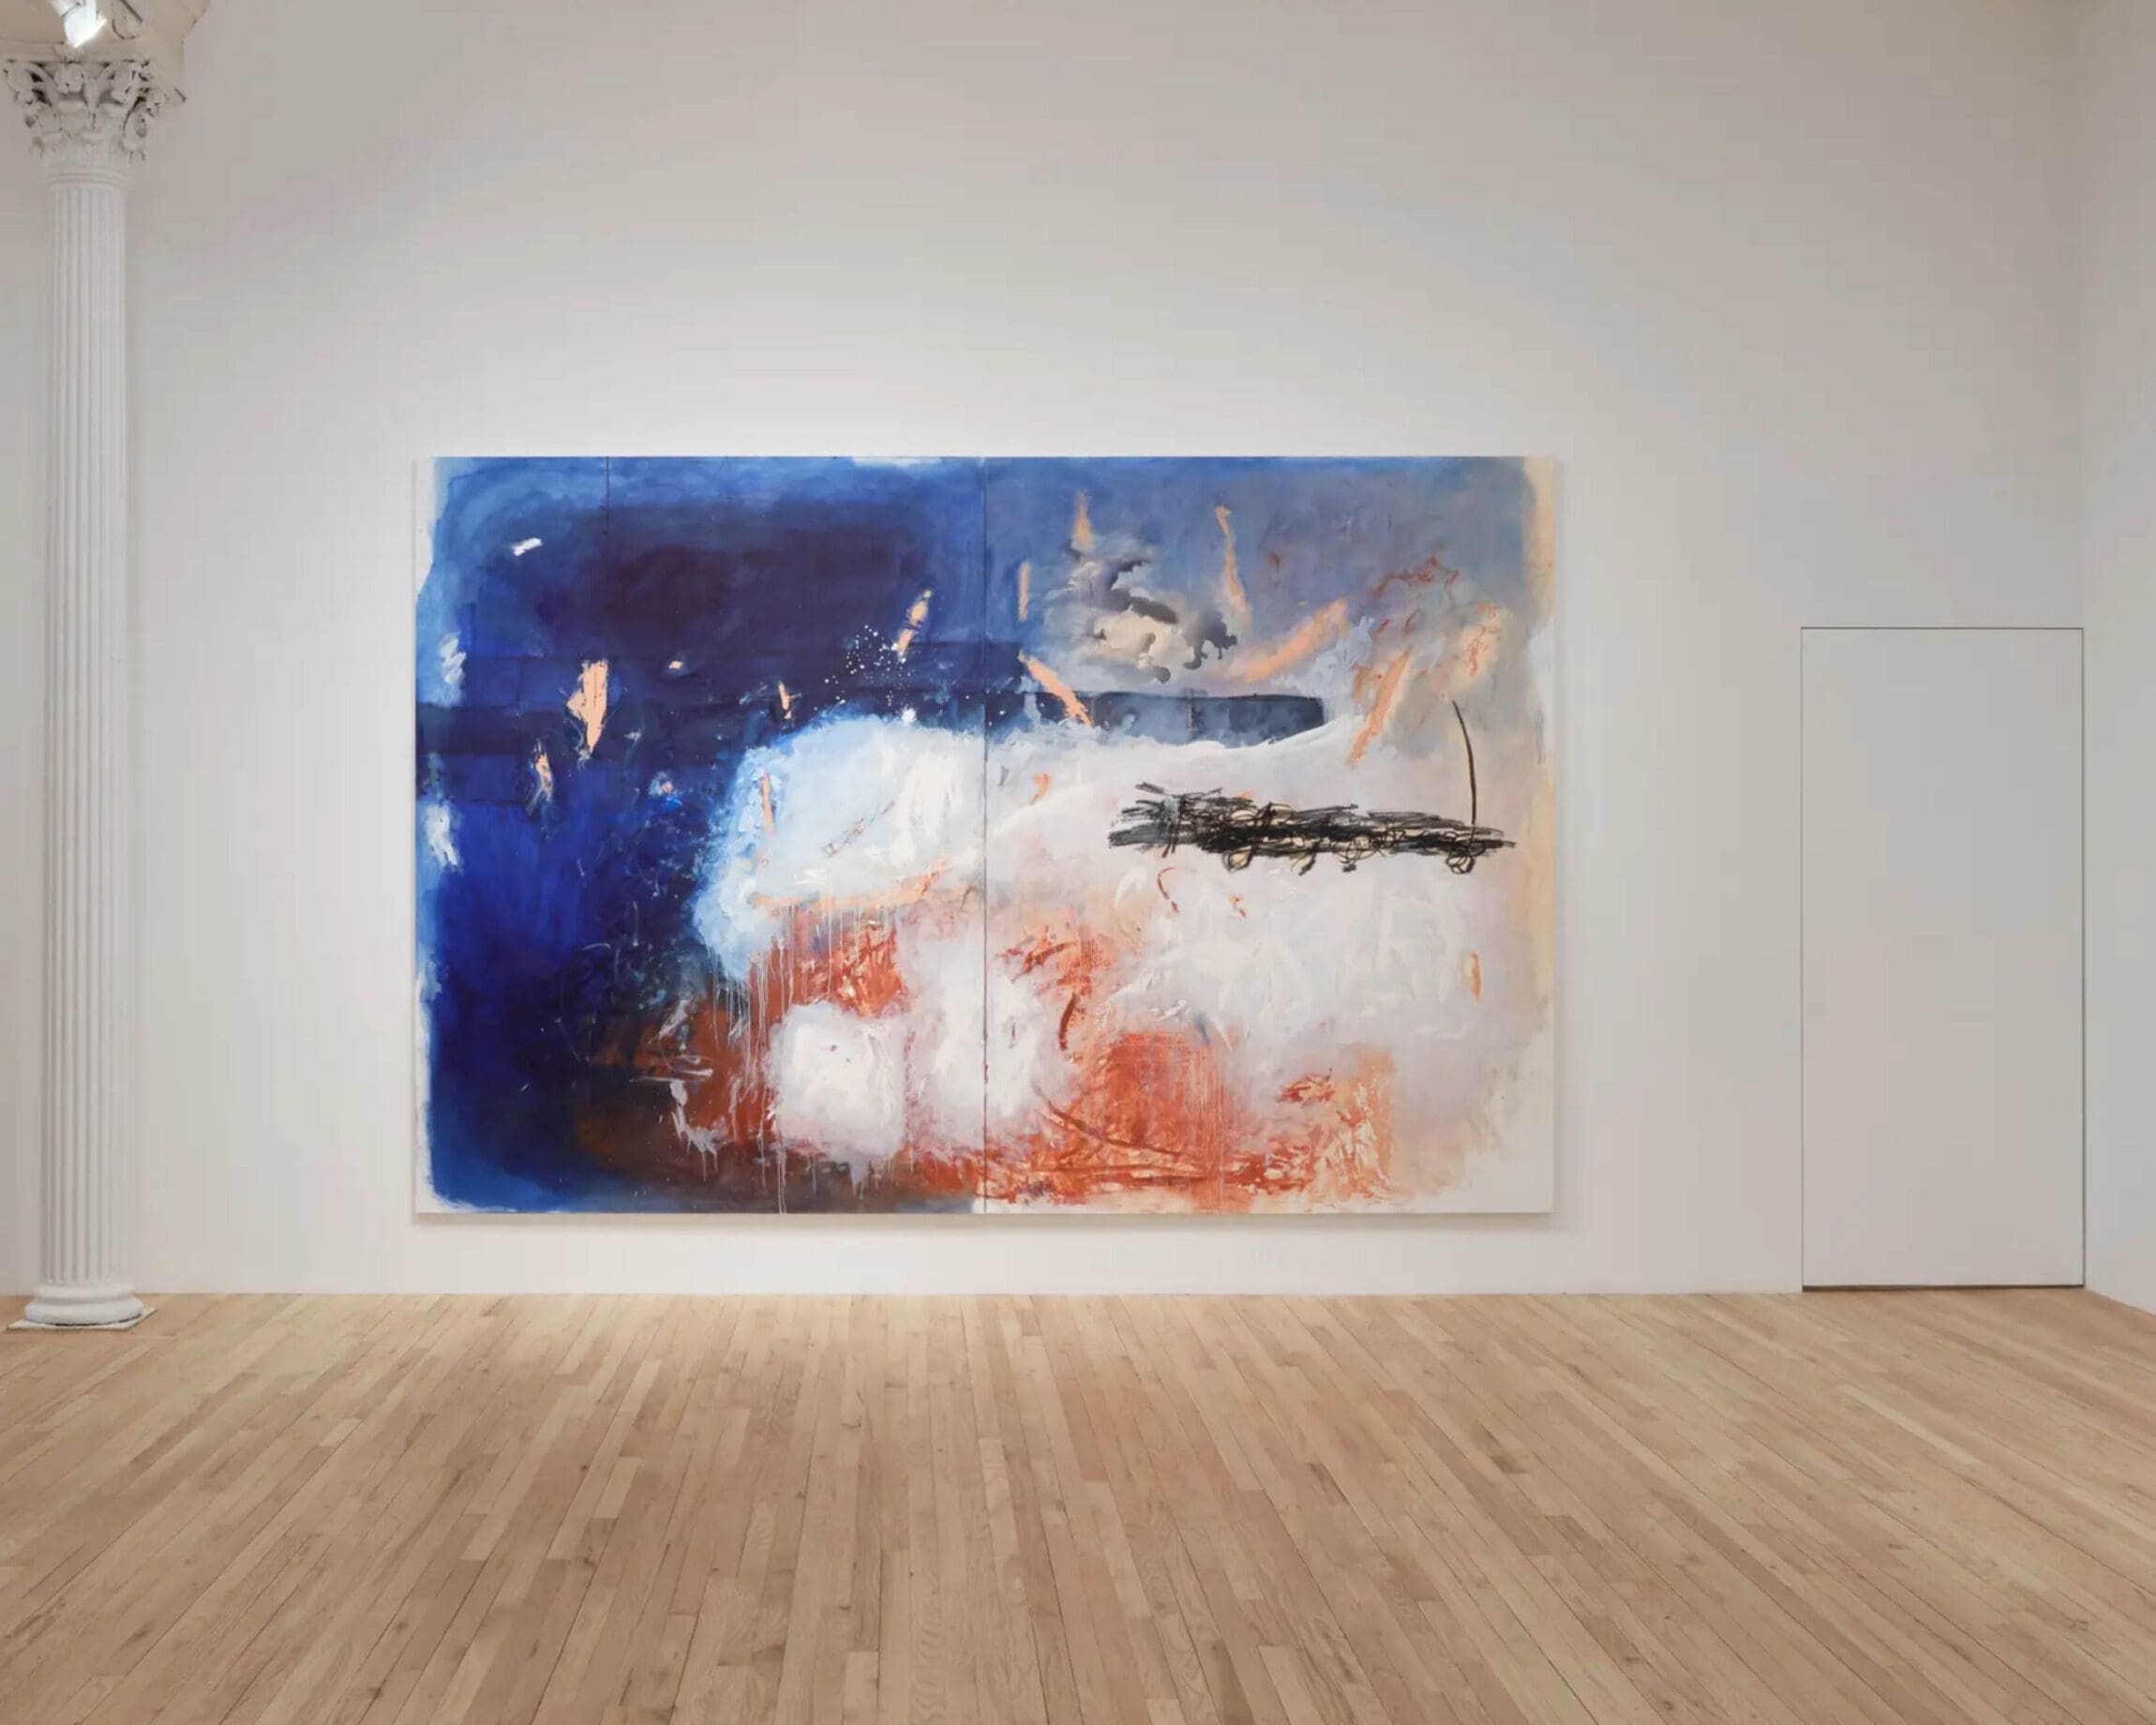 The best art galleries and museums in New York City | Some Landscapes installation view by Anh Trần, Searching the sky for dreams (barbed-wire lanes)